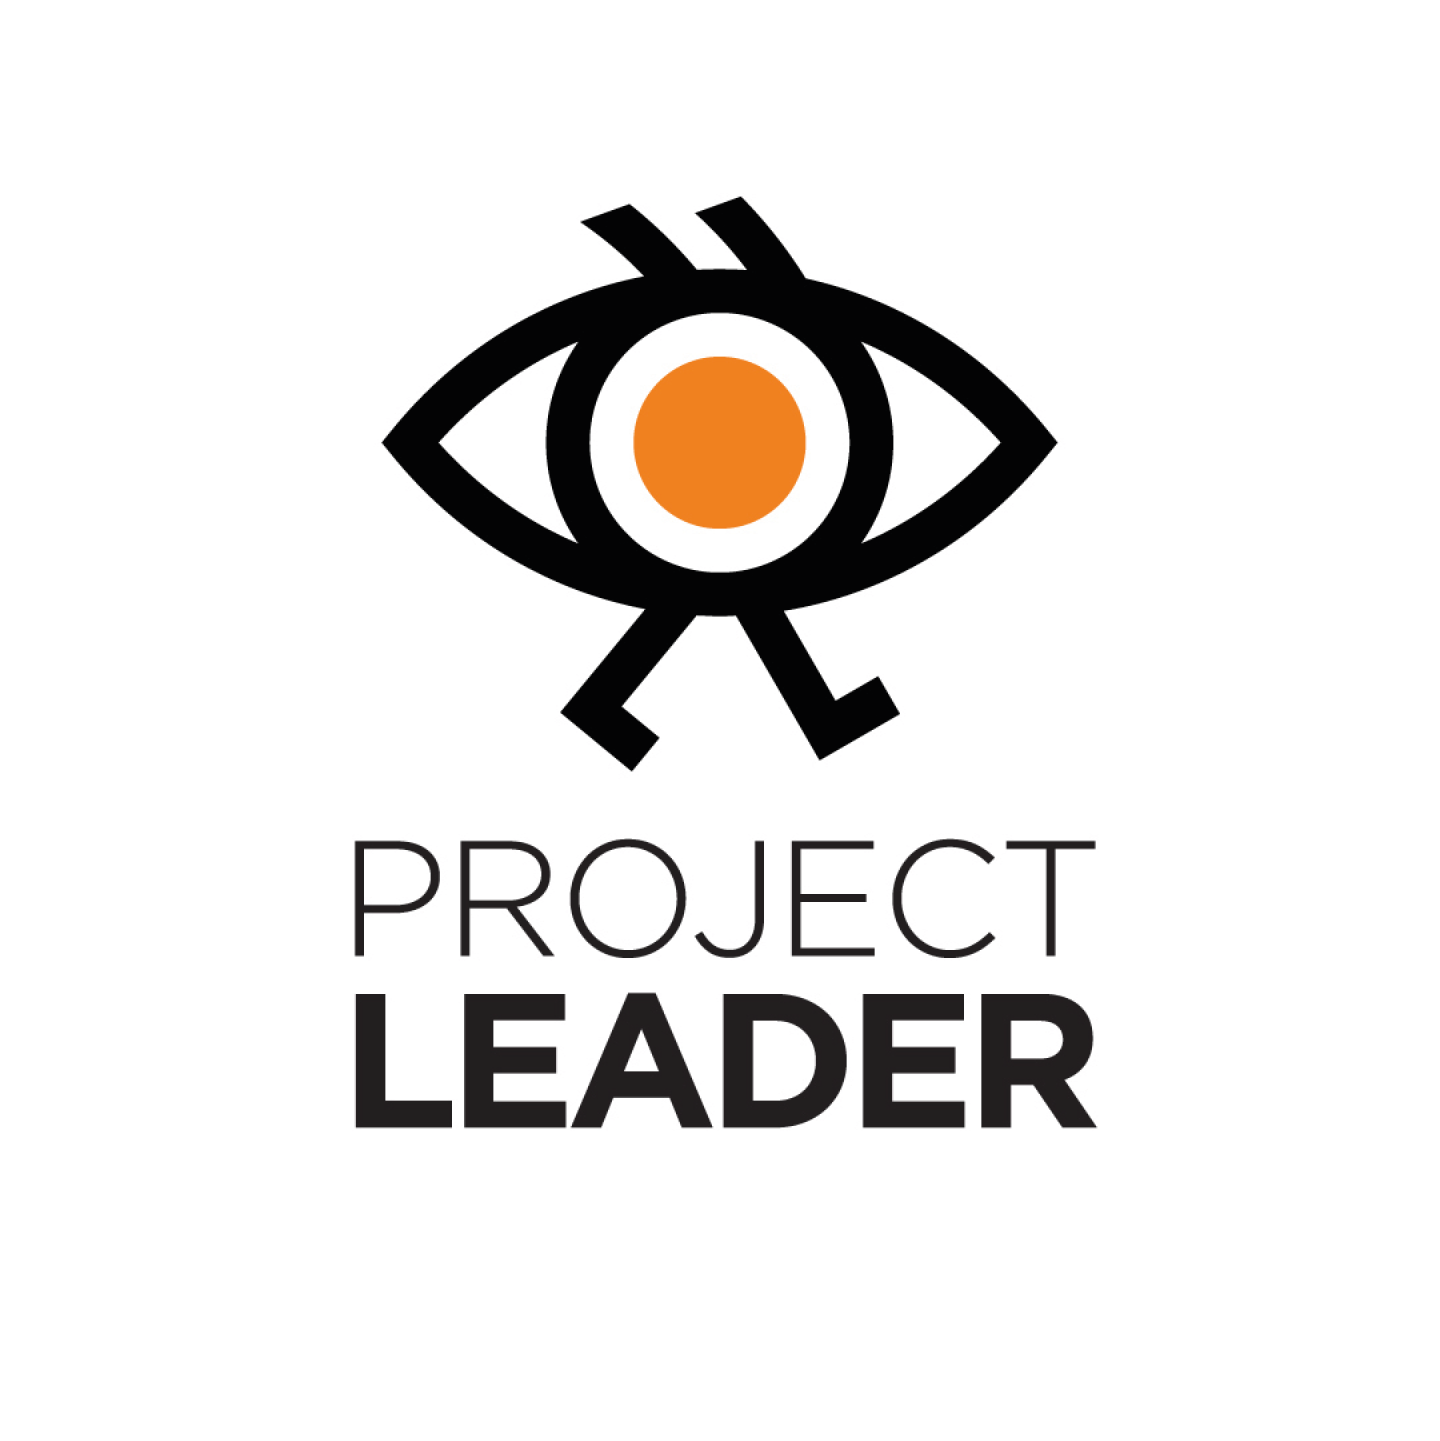 We are looking for NEW PROJECT LEADER